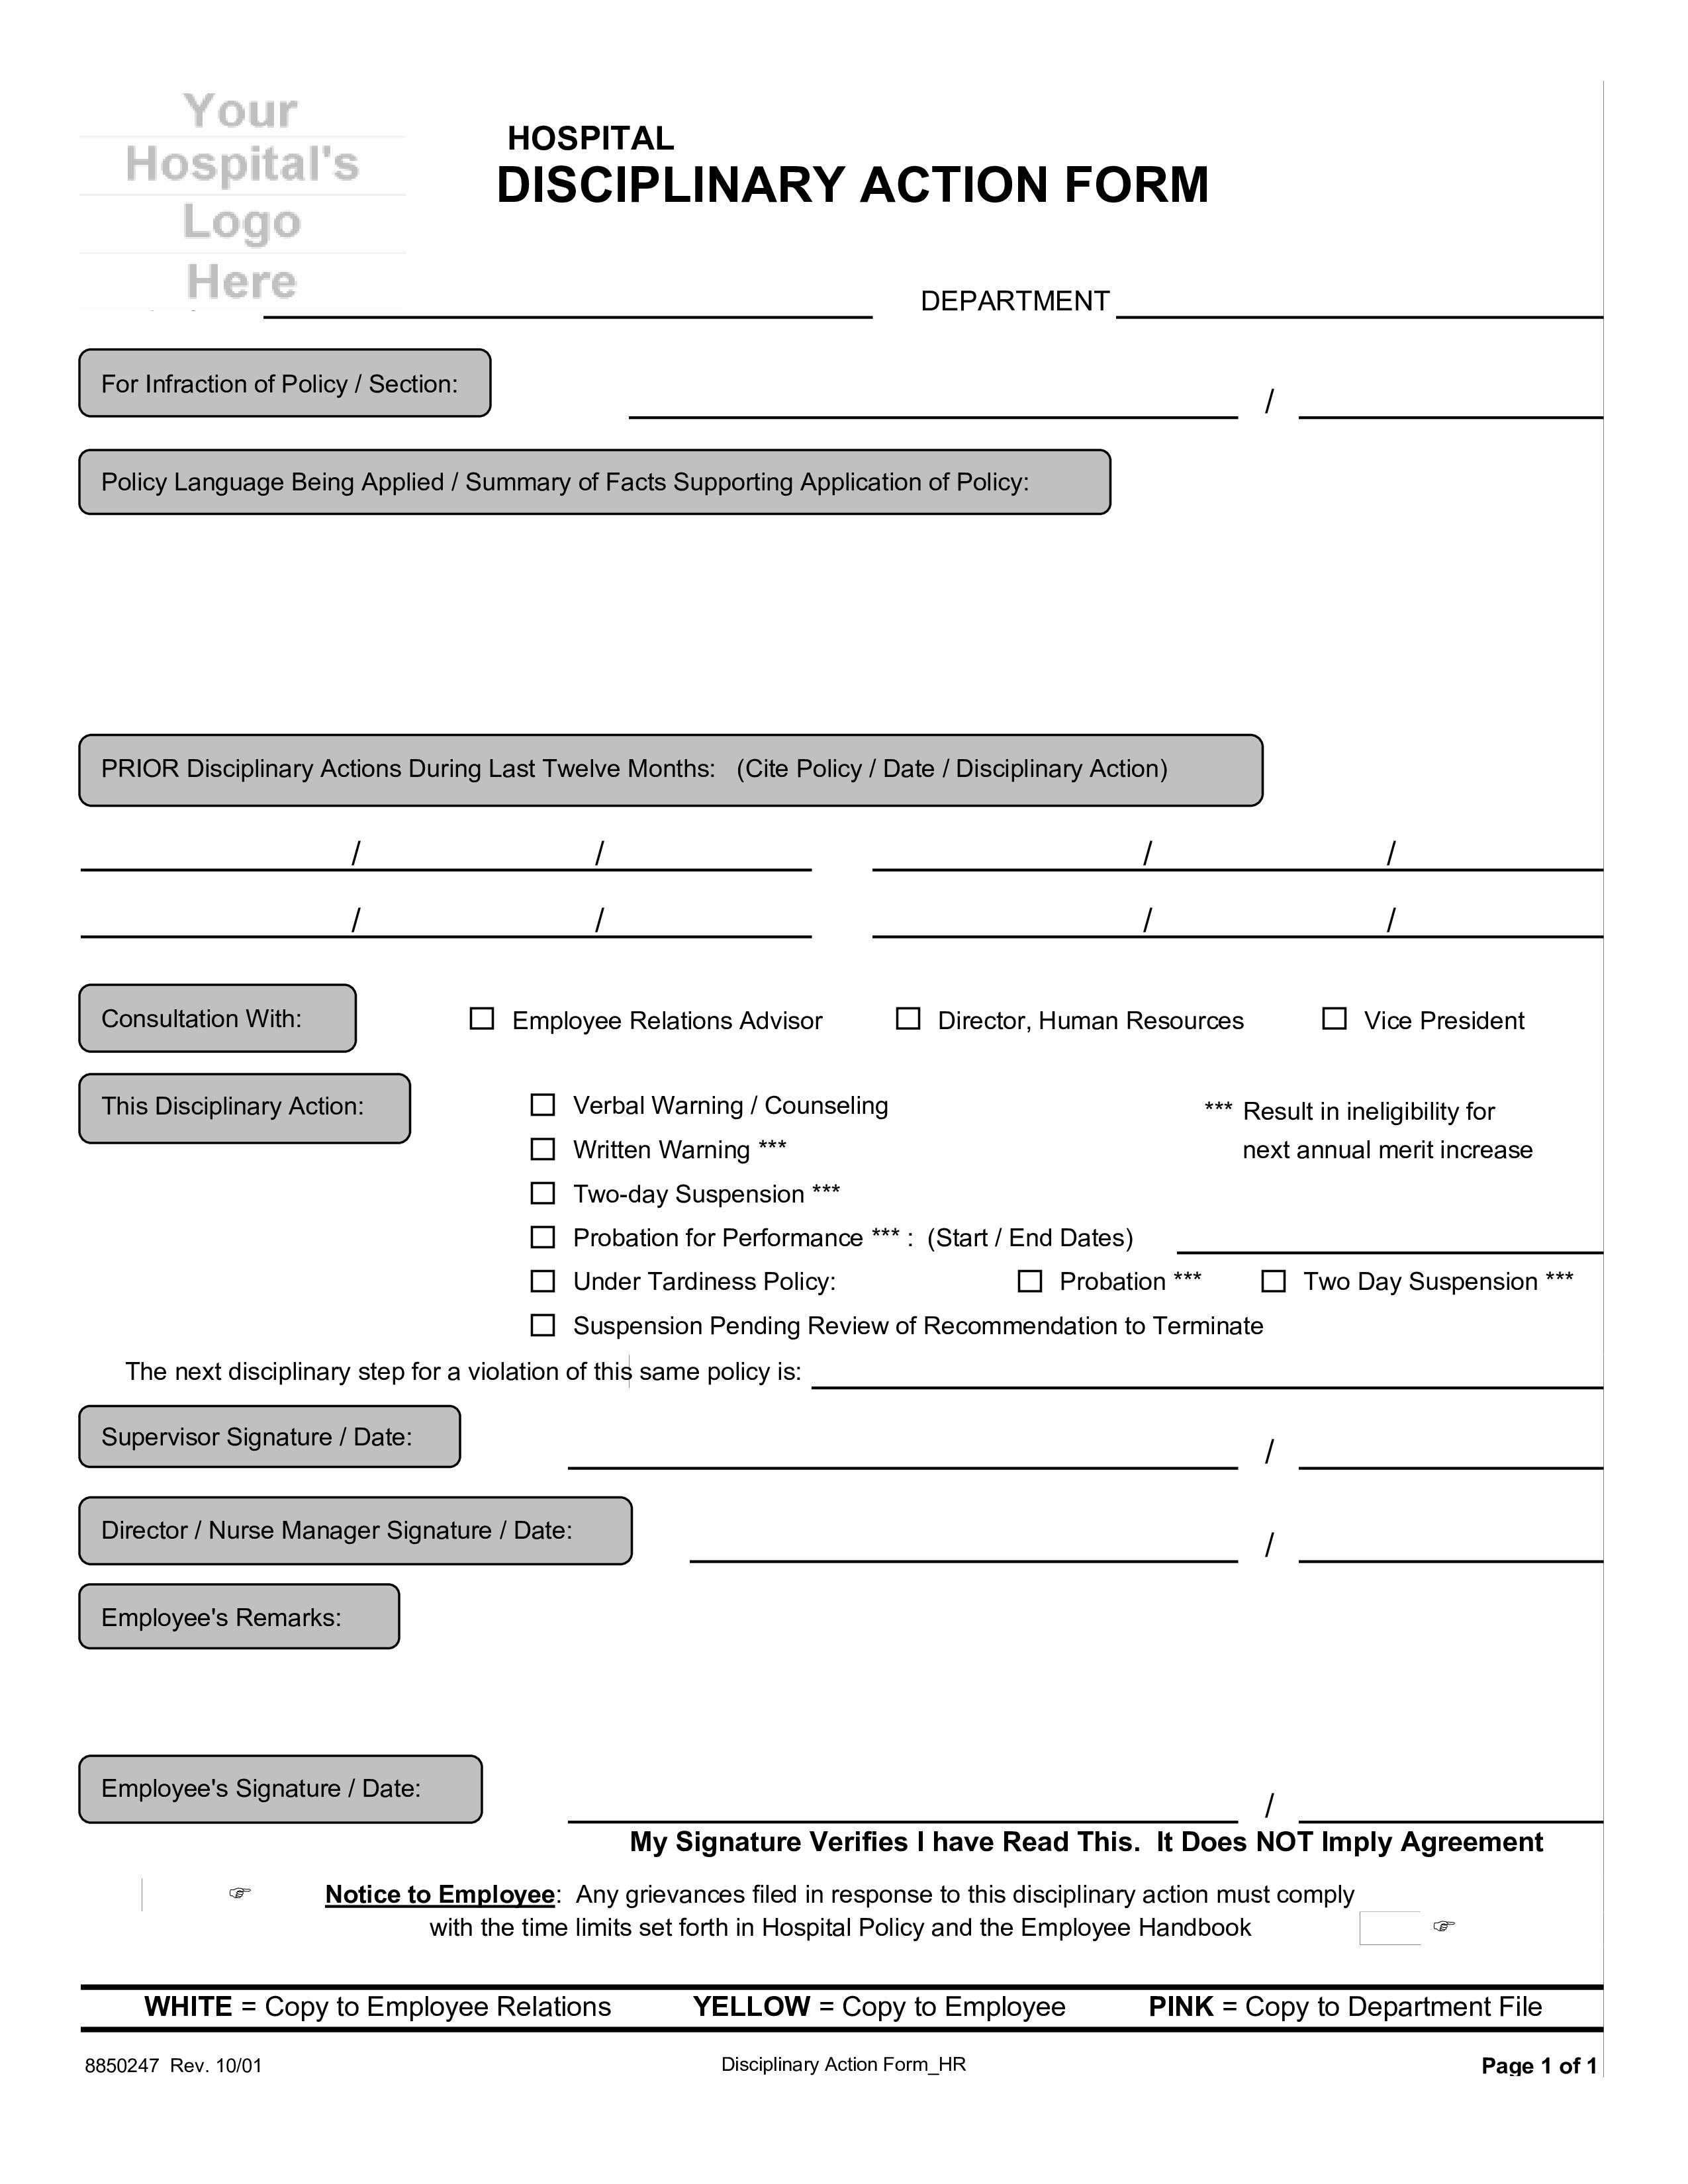 hospital disciplinary action form template